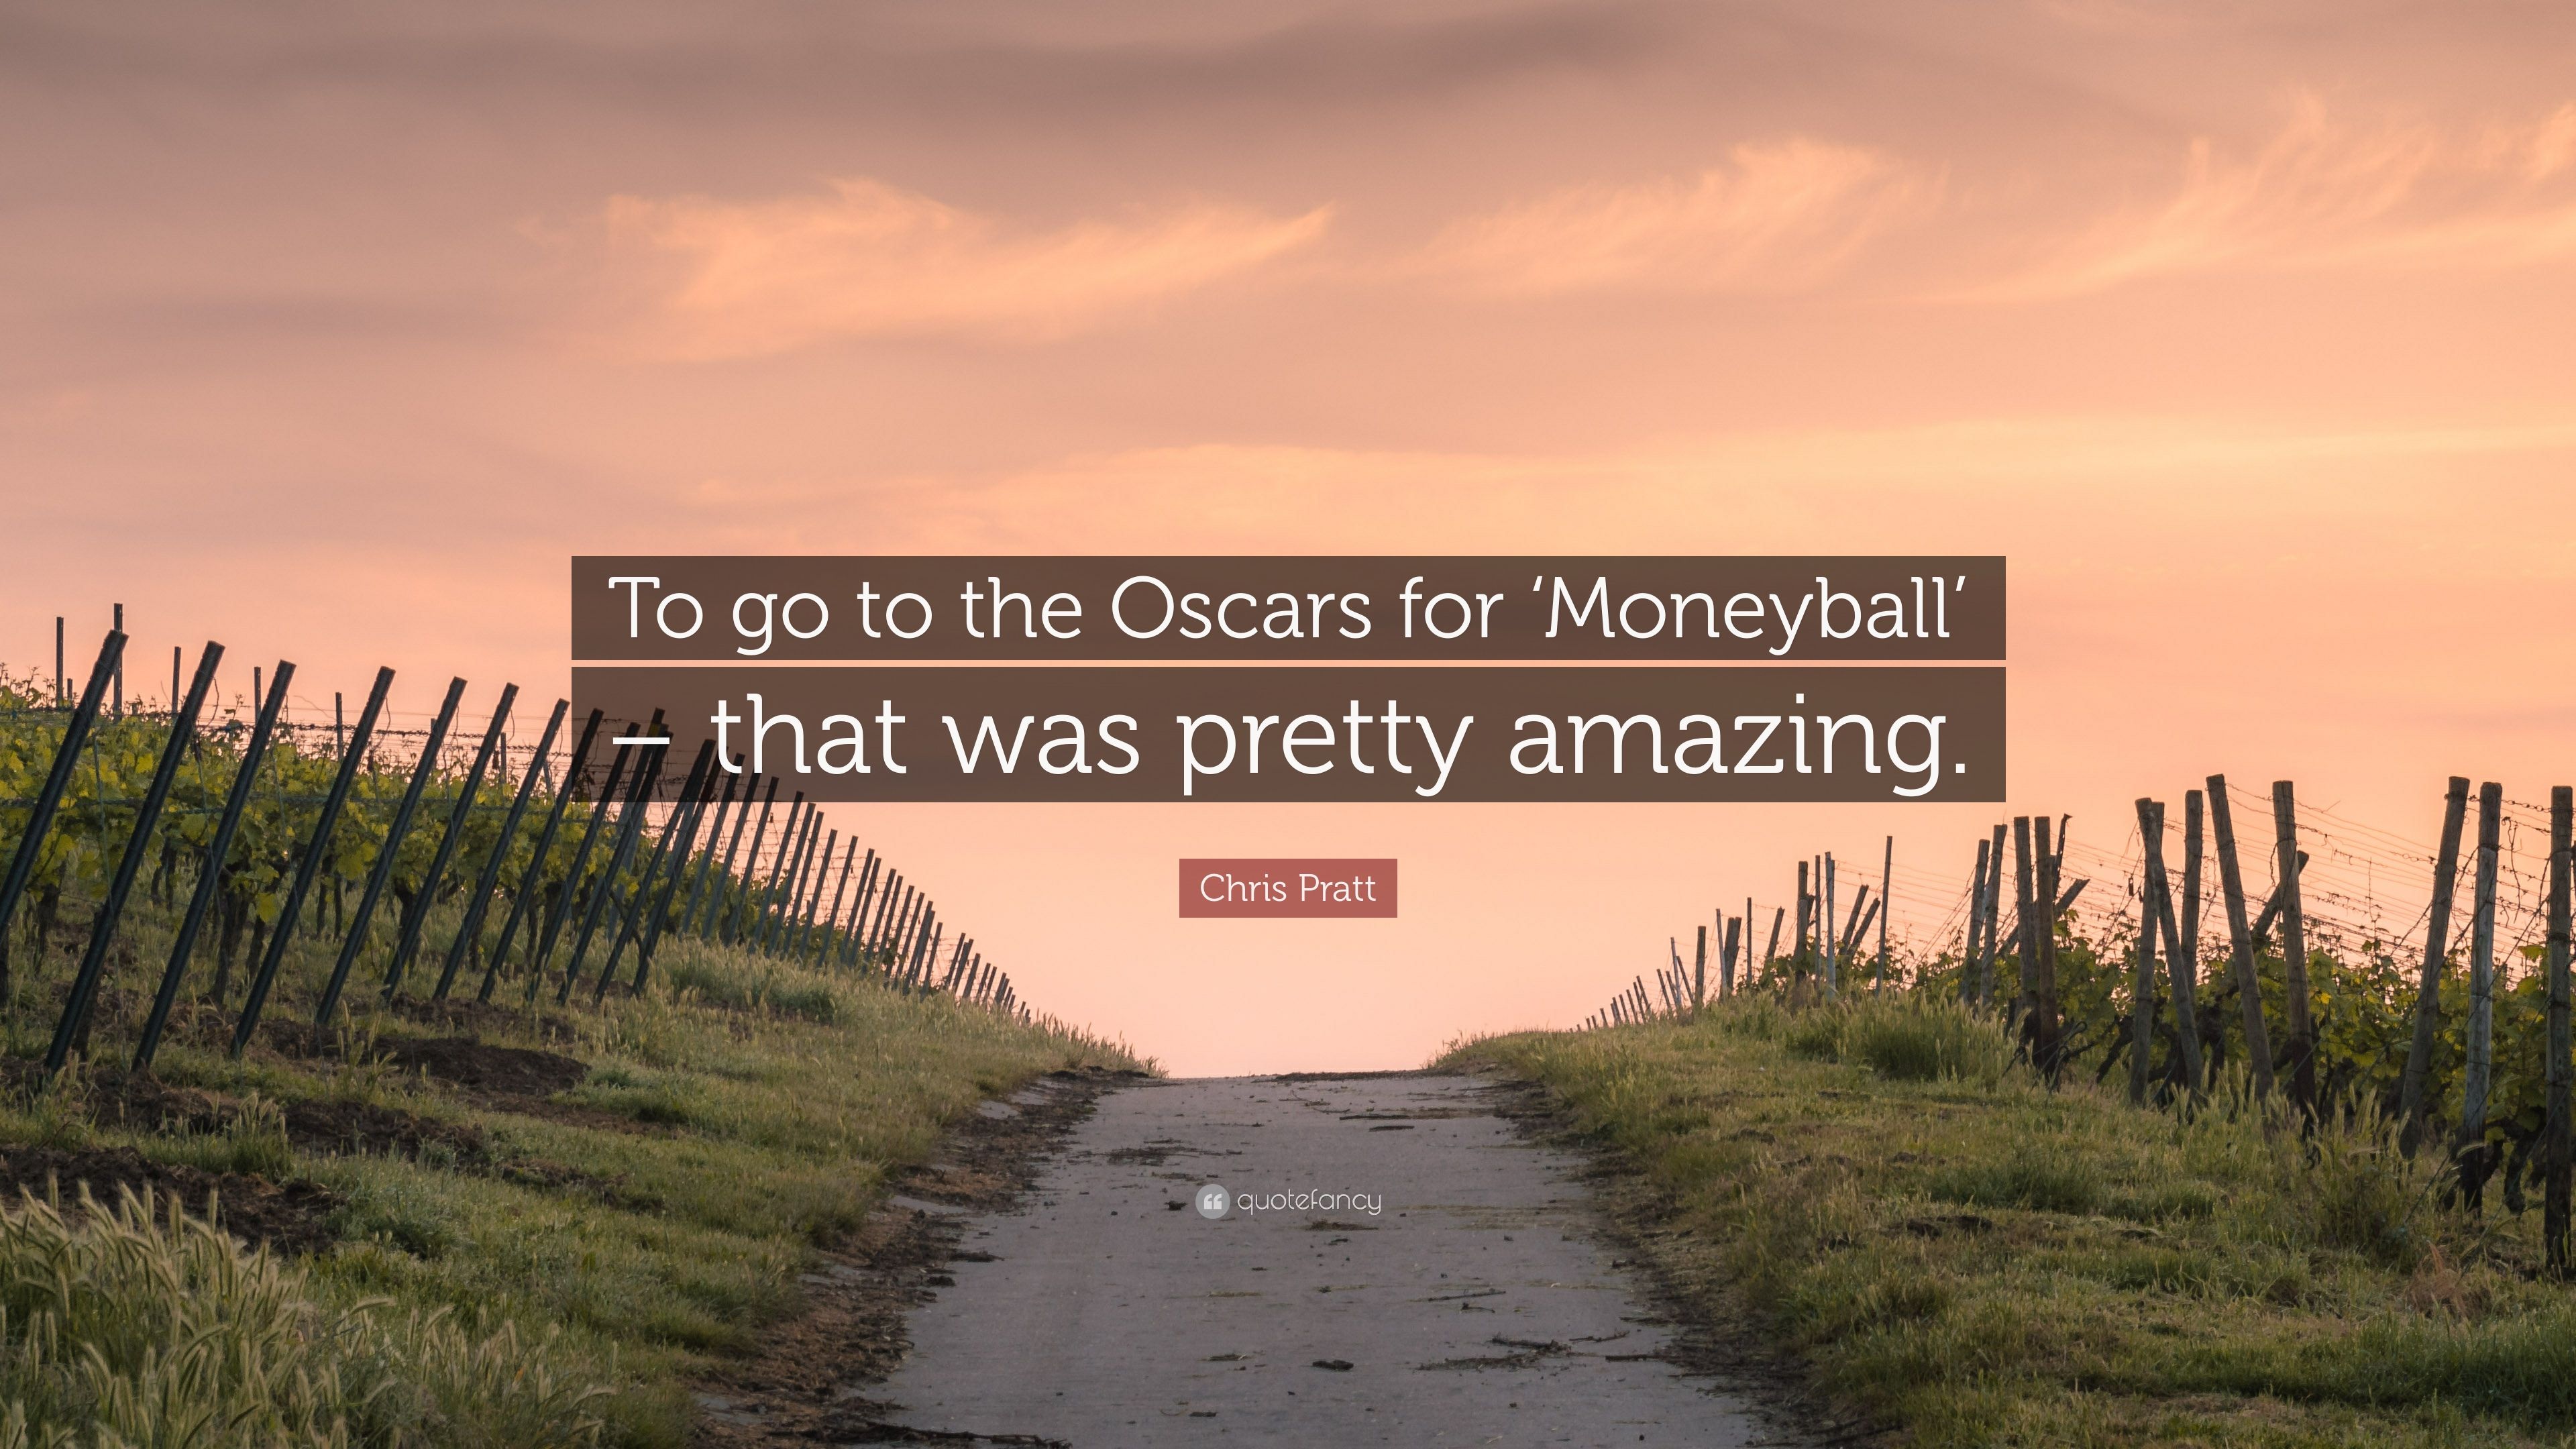 Chris Pratt Quote: “To go to the Oscars for 'Moneyball'